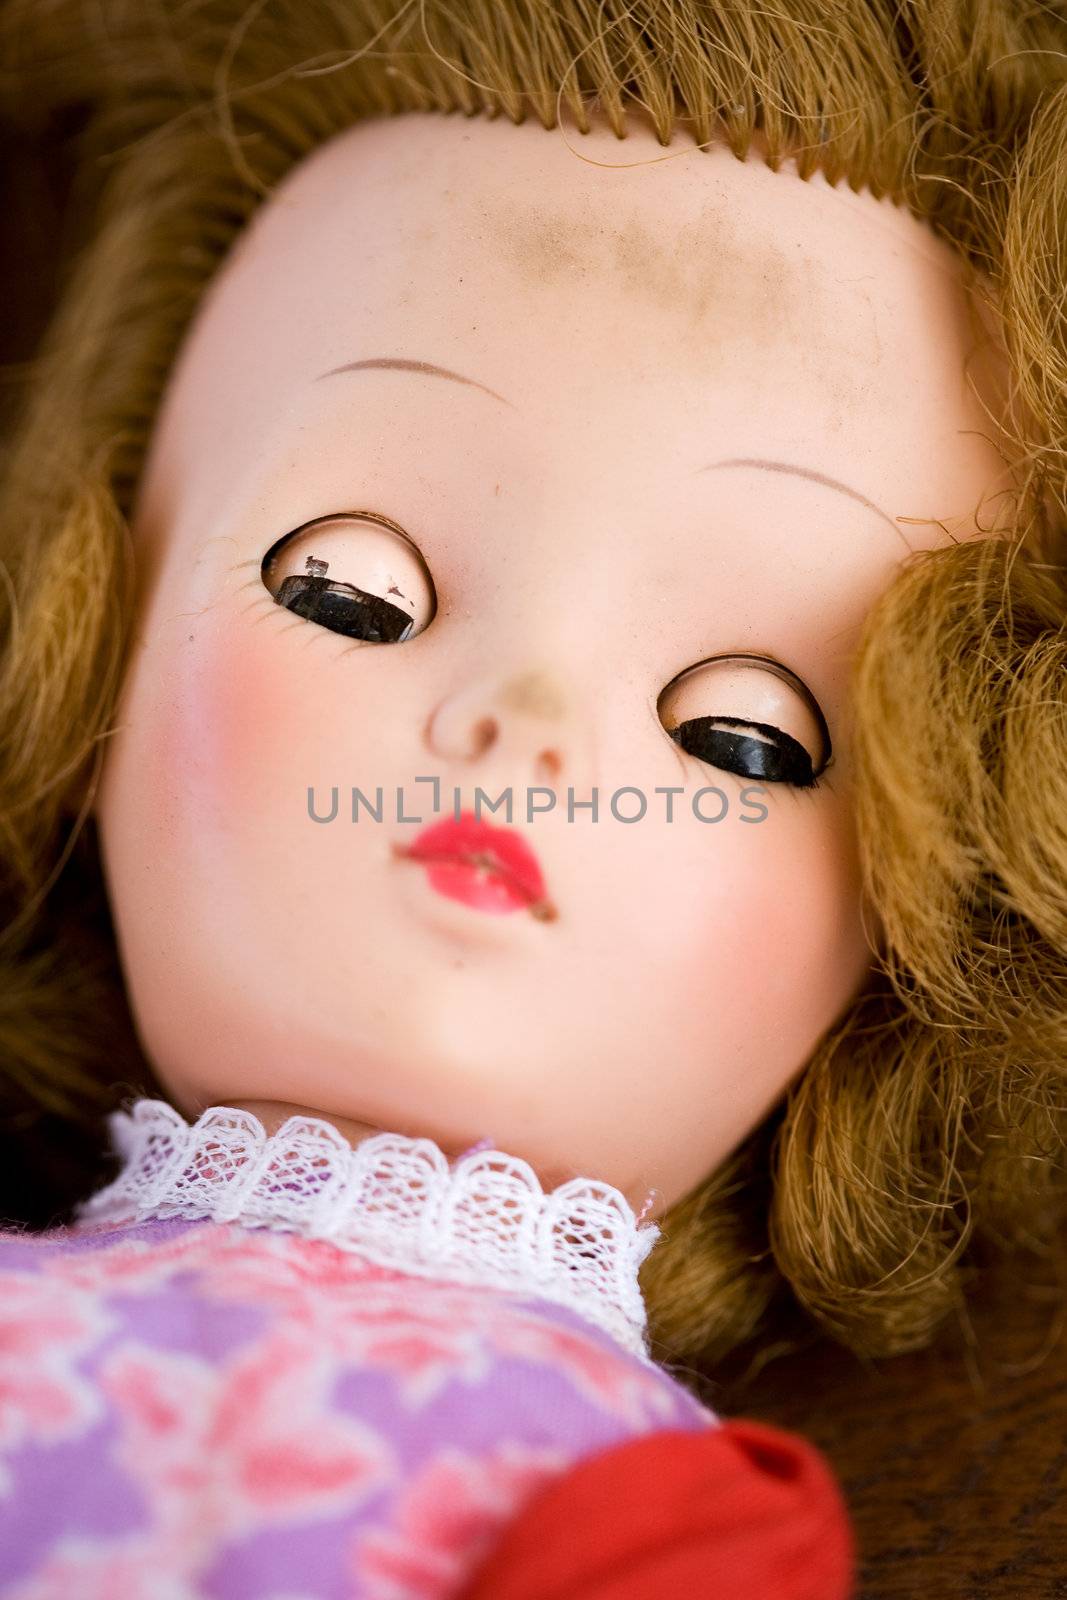 A close up of a doll face - focus on the eyes